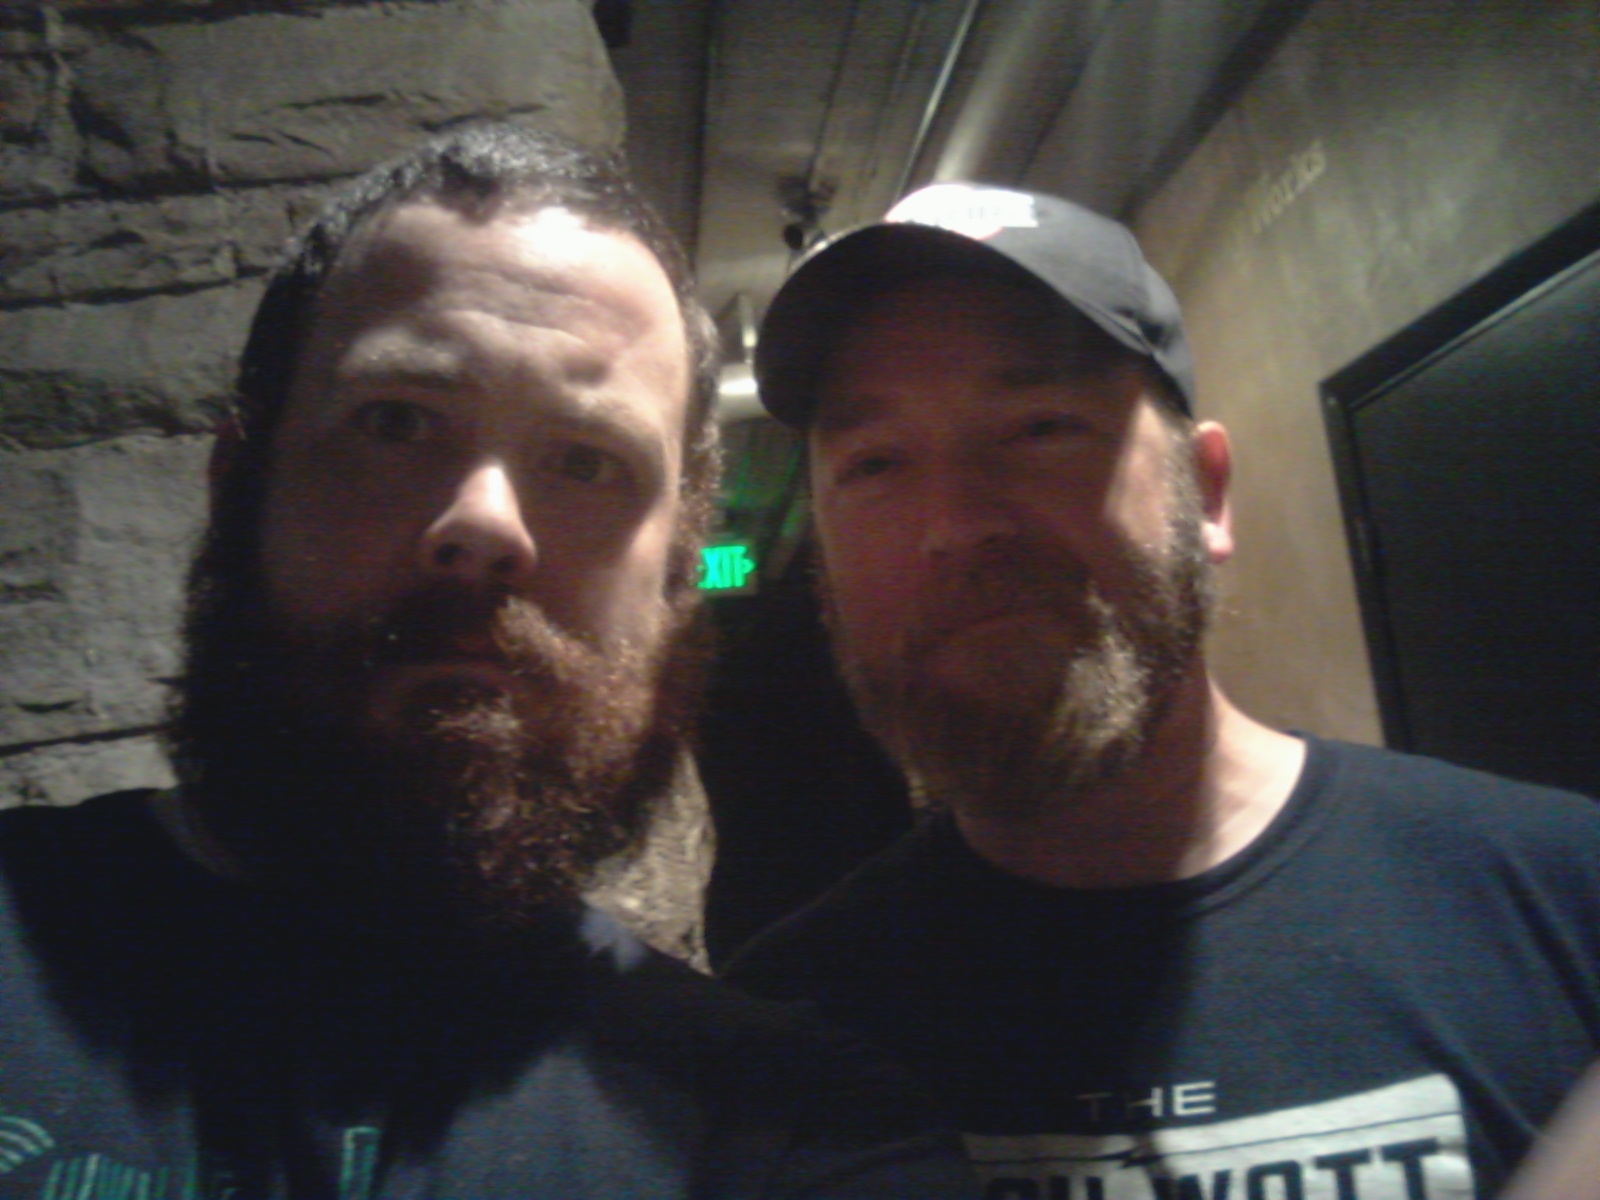 42 – COMEDIAN KYLE KINANE INTERVIEW about Punk Rock, The melding of music and Comedy, BMX Bicycles, Do It Yourself mentality, drinking and more!